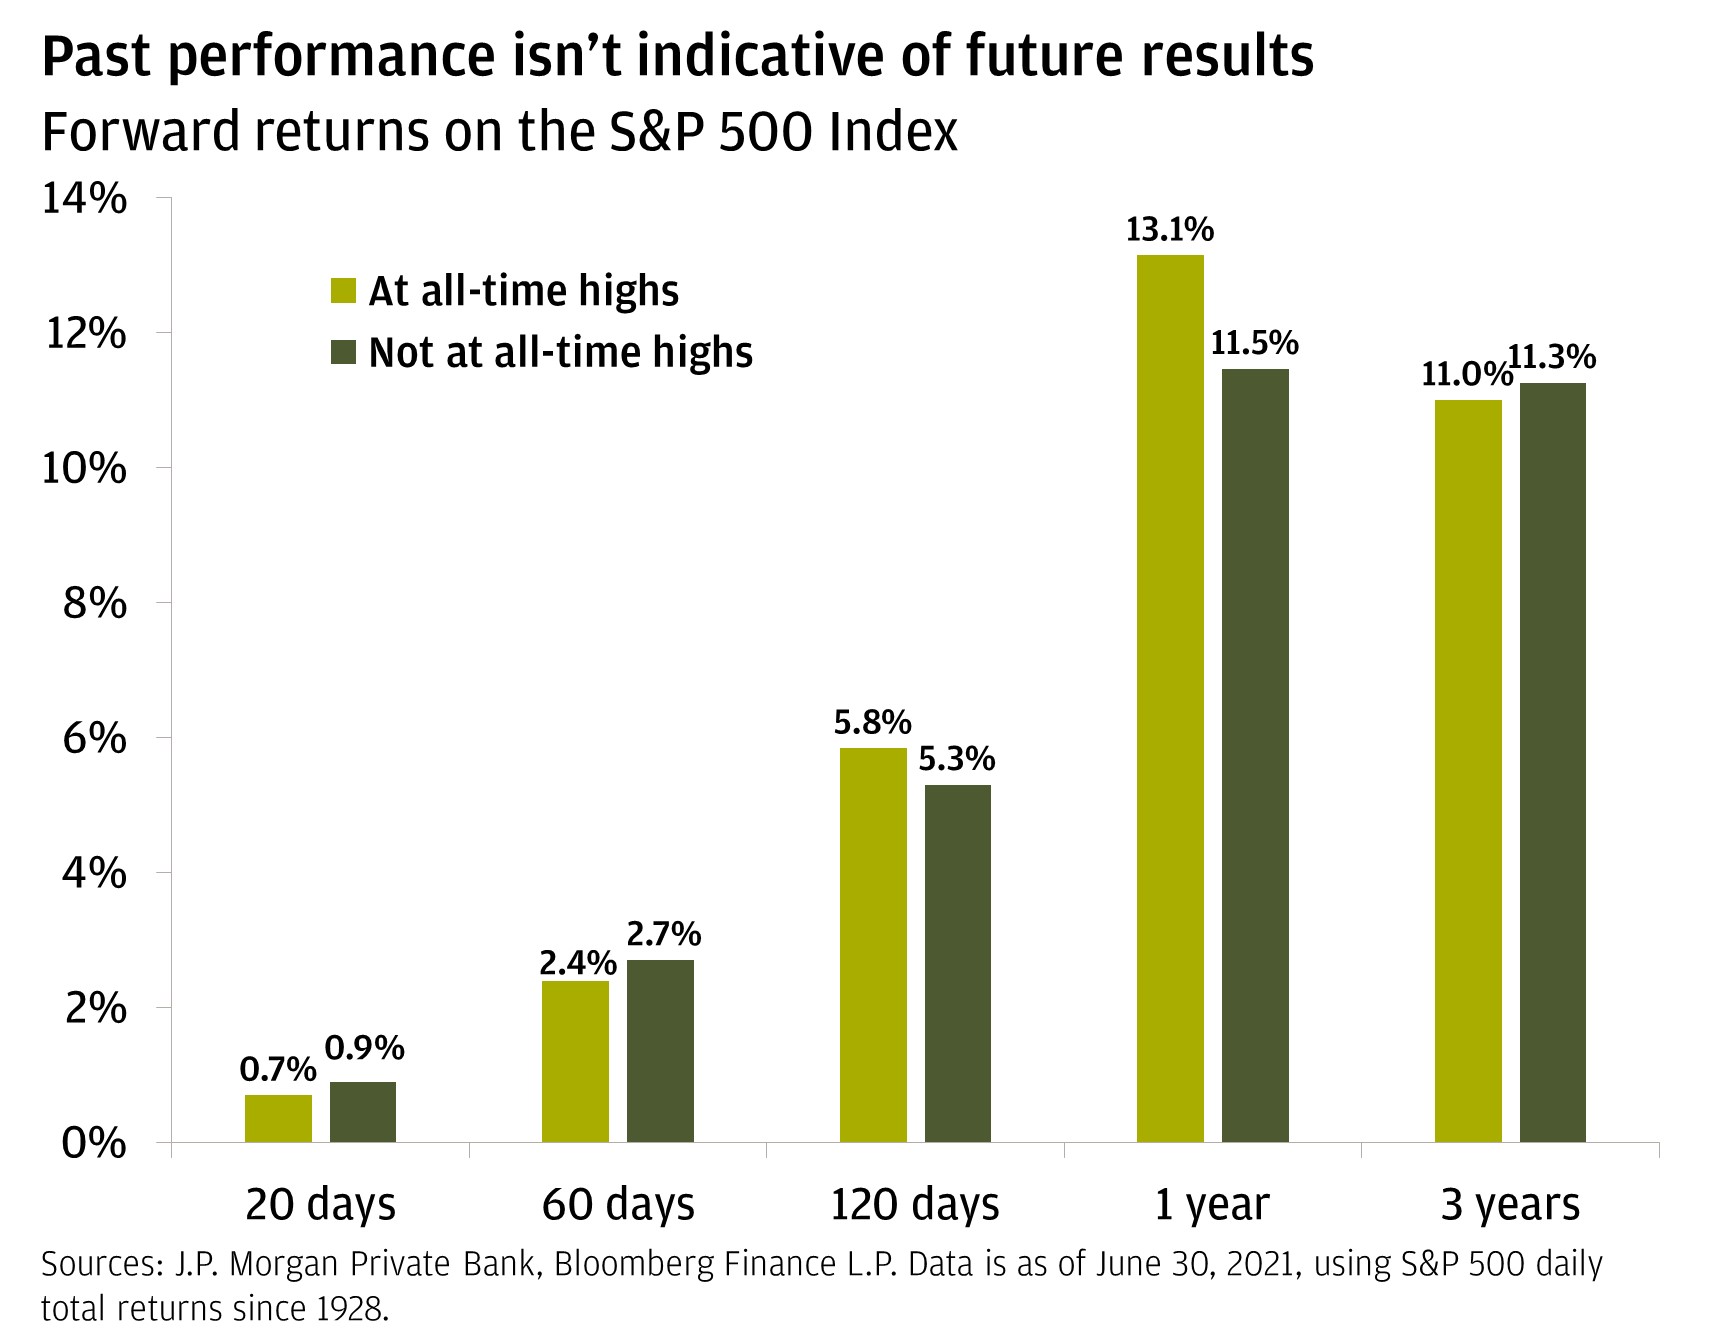 This chart shows the performance of the S&P 500 at various time intervals for both investing periods that started at all-time highs and not at all-time highs. It is based on market performance since 1928. It tells us that investing at all-time highs offers similar forward returns to investing when markets aren’t at all-time highs by considering periods from as little as 20 days up to 3 years. For 20 days, all-time highs returns 0.7% whereas not at all time-highs returns 0.9%. For 60 days, all-time highs returns 2.4% whereas not at all time-highs returns 2.7%. For 120 days, all-time highs returns 5.8% whereas not at all time-highs returns 5.3%. For 1 year, all-time highs returns 13.1% whereas not at all time-highs returns 11.5%. For 3 years, all-time highs returns 11.0% whereas not at all time-highs returns 11.3%.